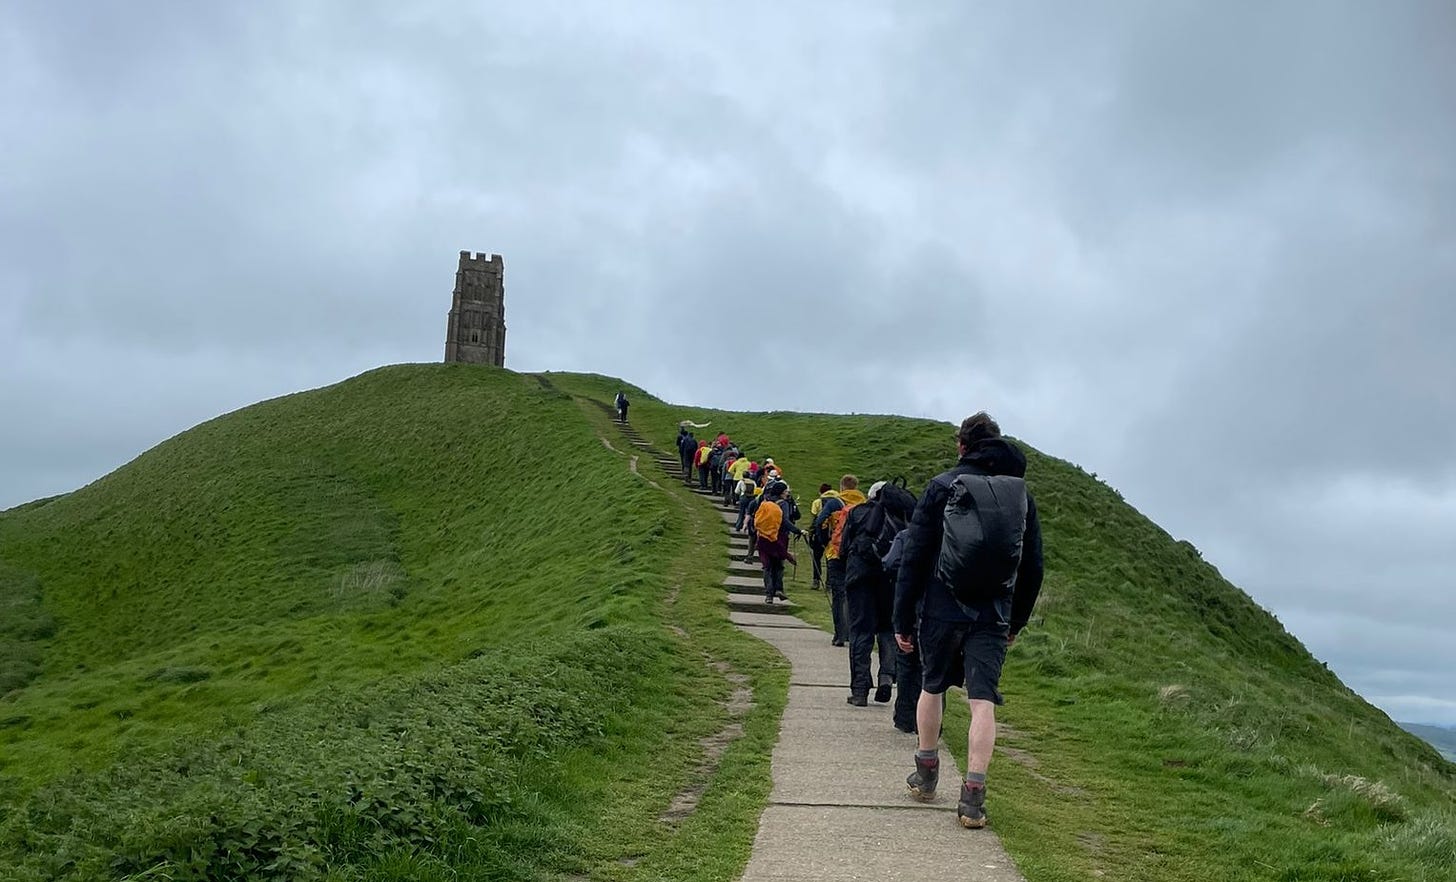 Walkers in single file, walking on a concrete path up a green hill with a church tower on the top